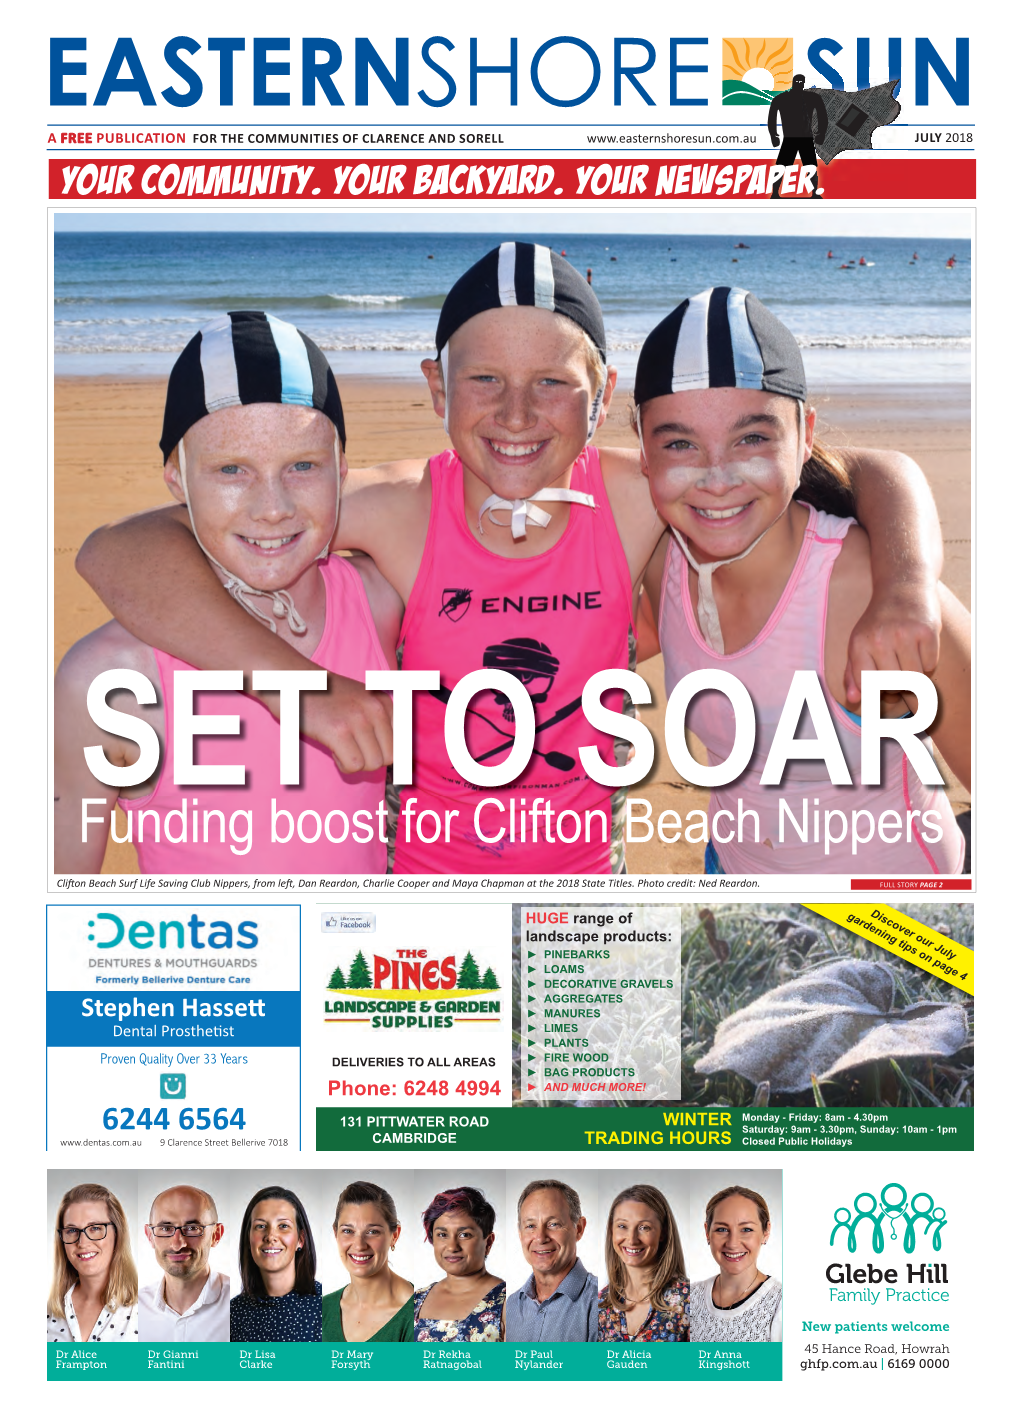 Funding Boost for Clifton Beach Nippers